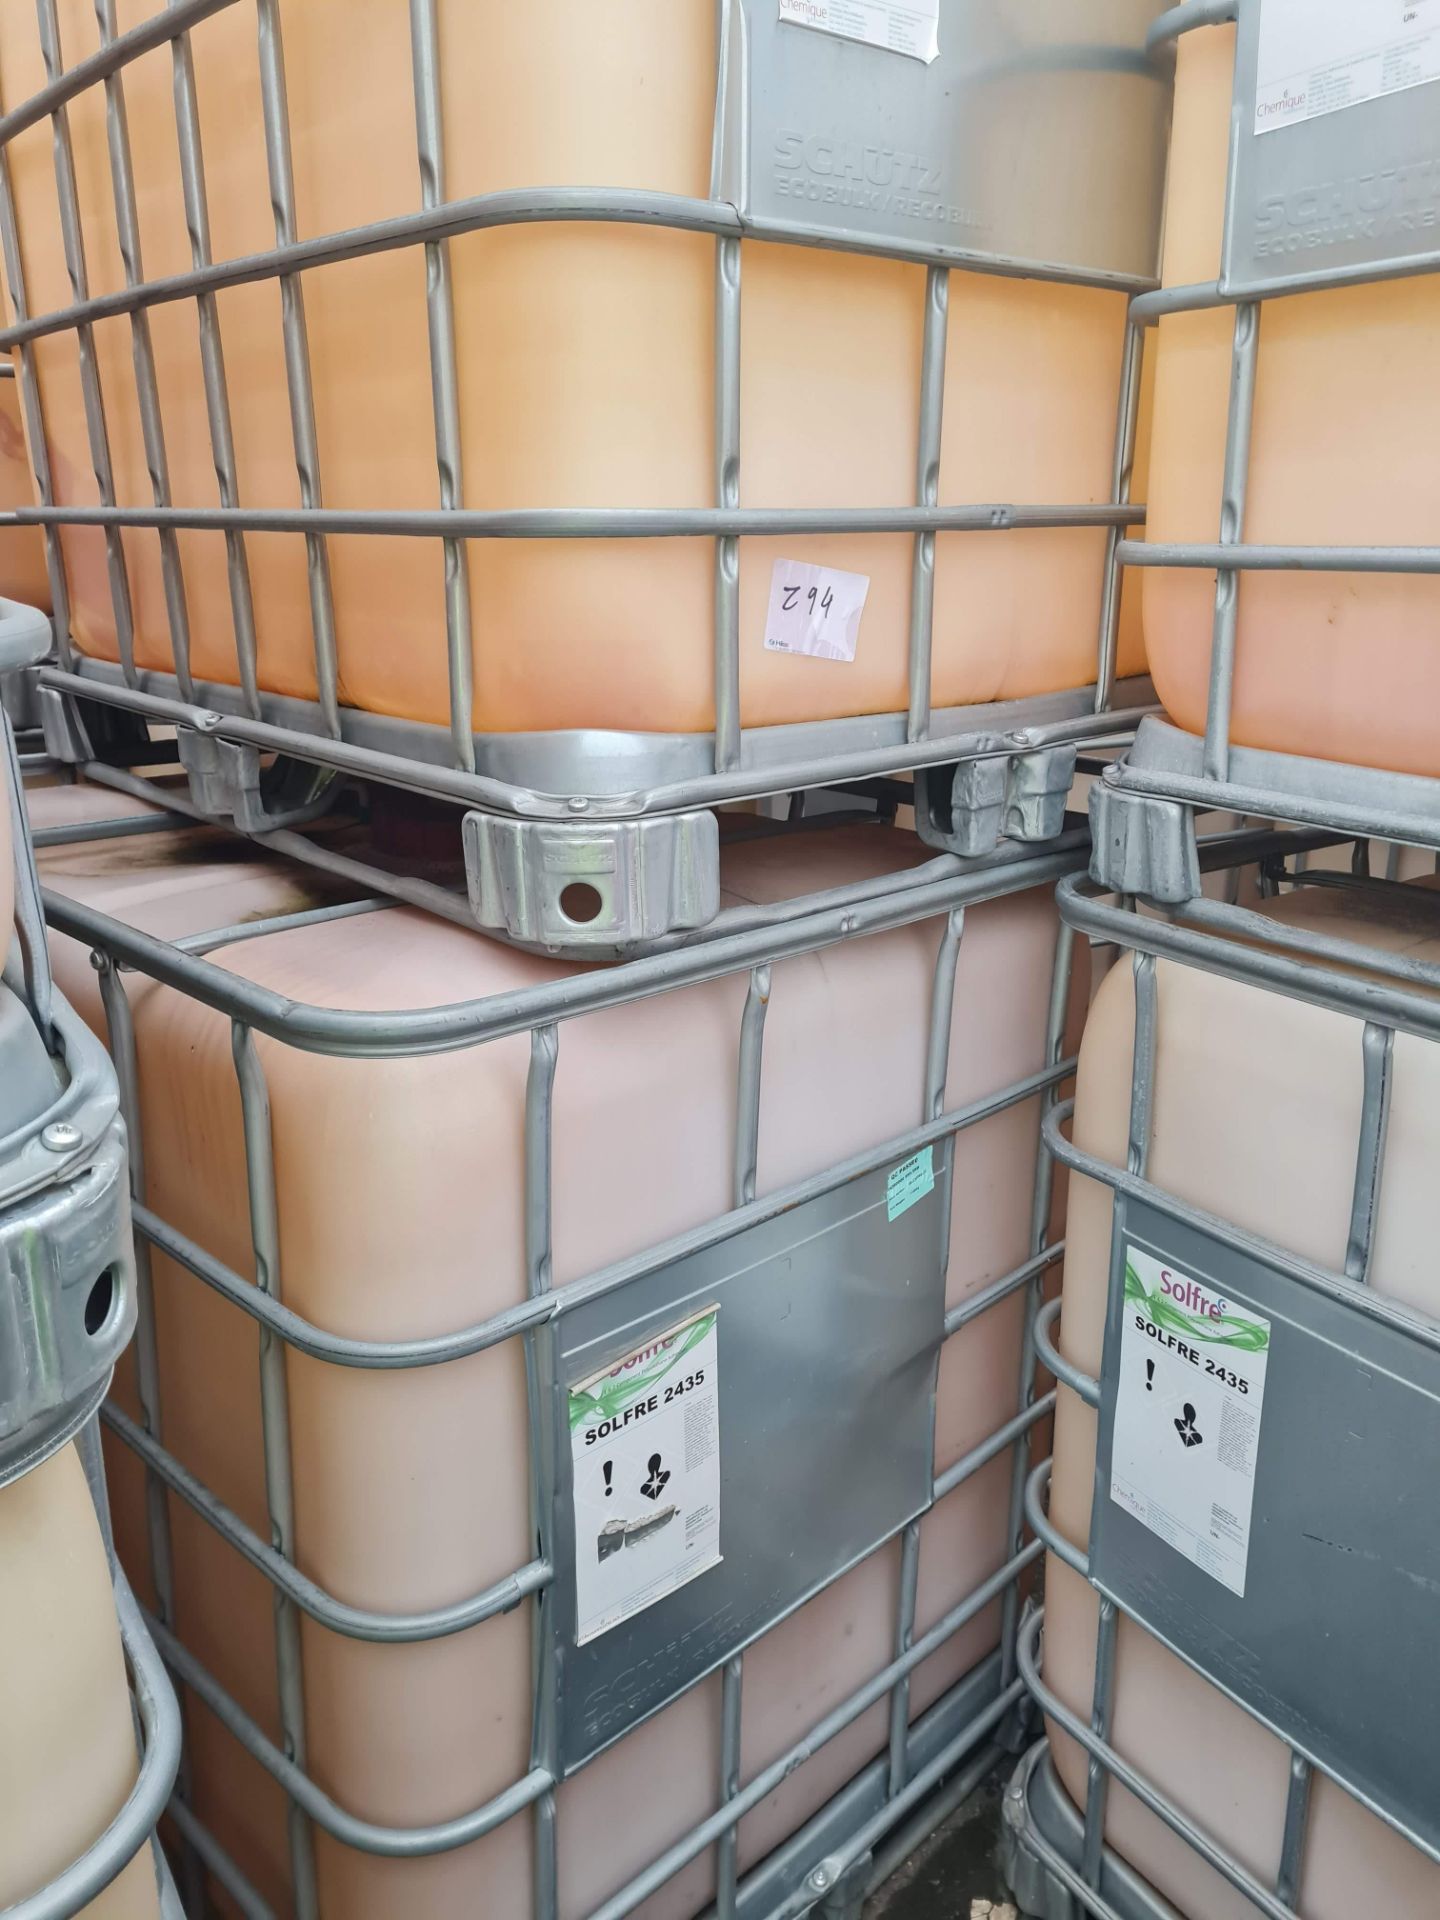 2 IBC Cages + Plastic Tank Contents Must Be Removed With Tank